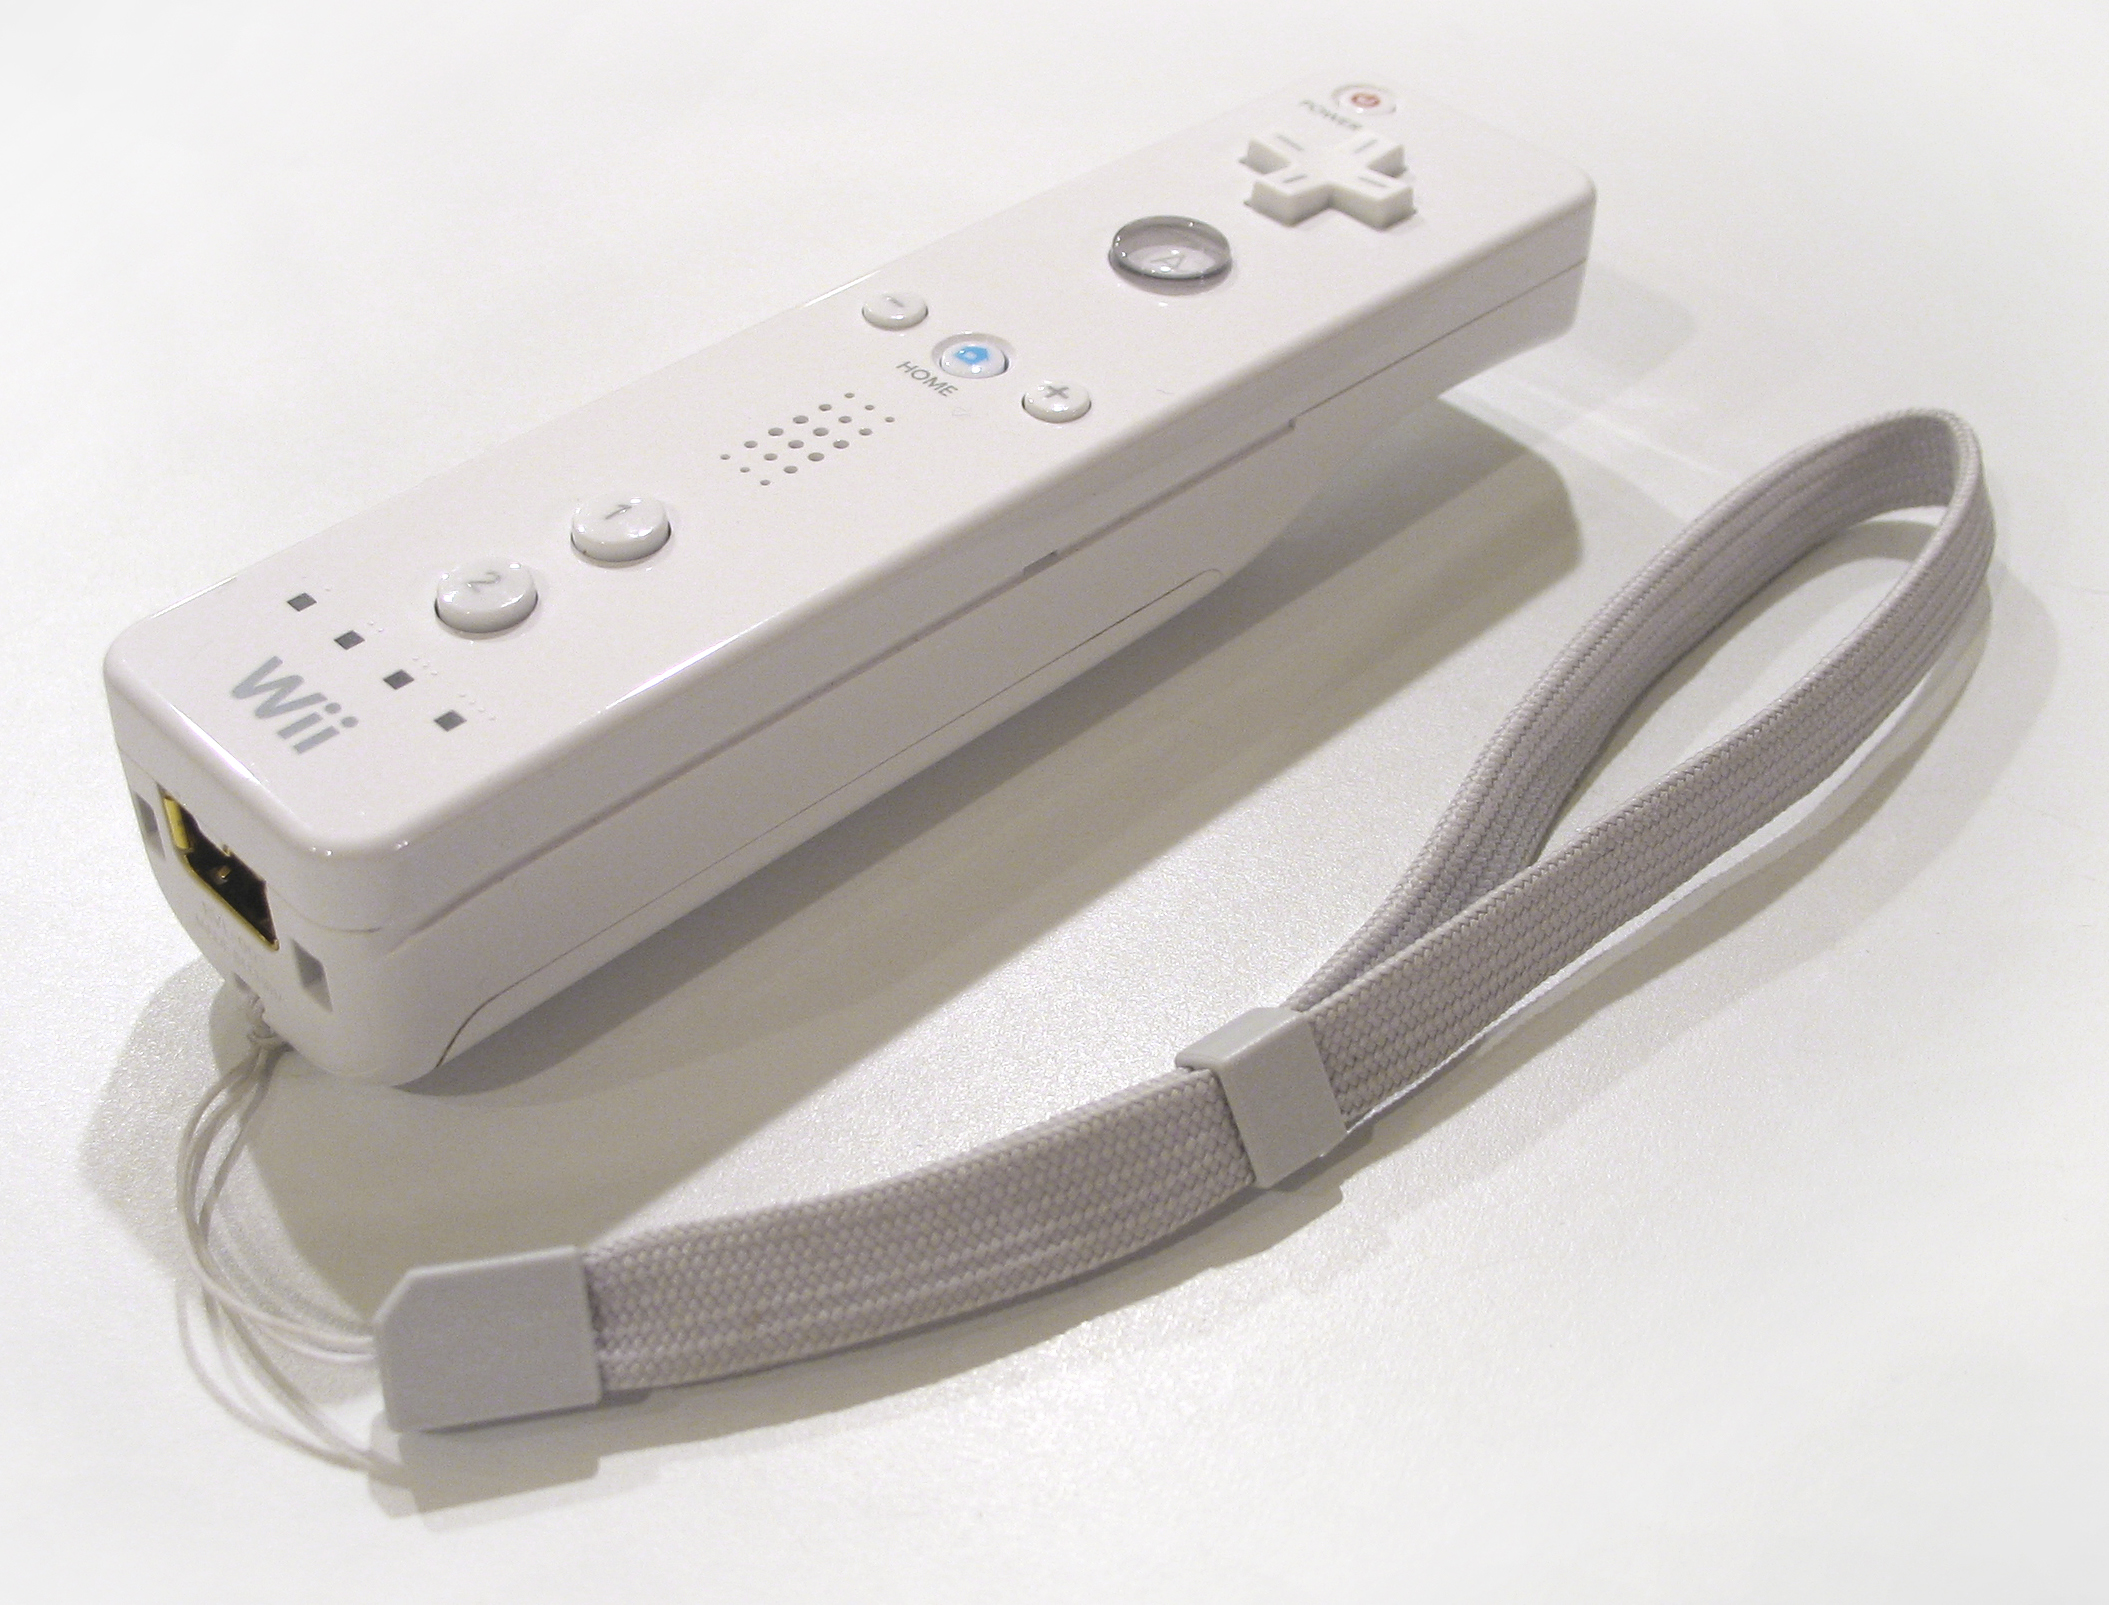 Rumor: Official Wii Remote rechargeable battery on the horizon